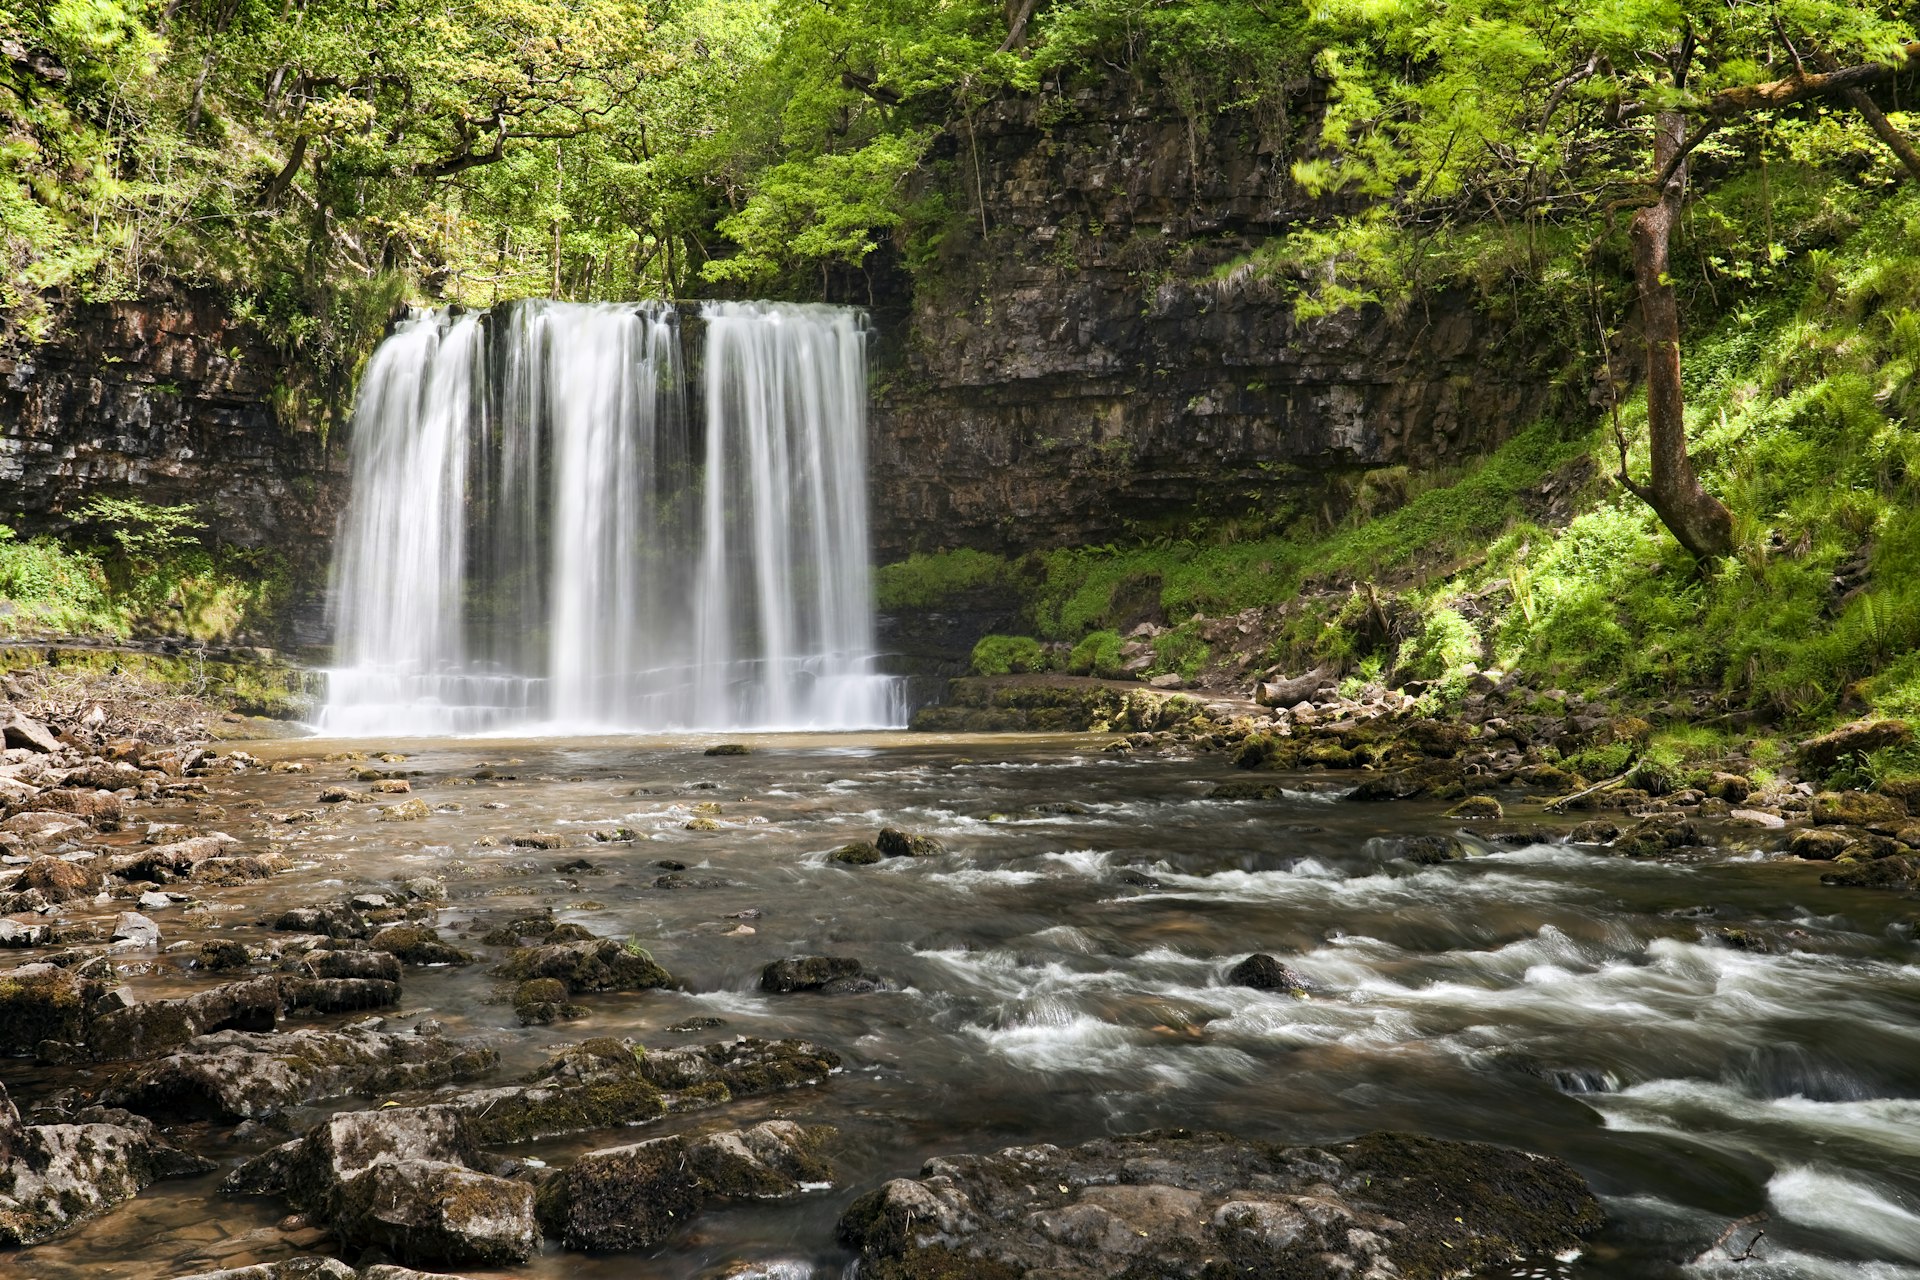 Sgwd yr Eira, a horseshoe waterfall, plunges into a pool